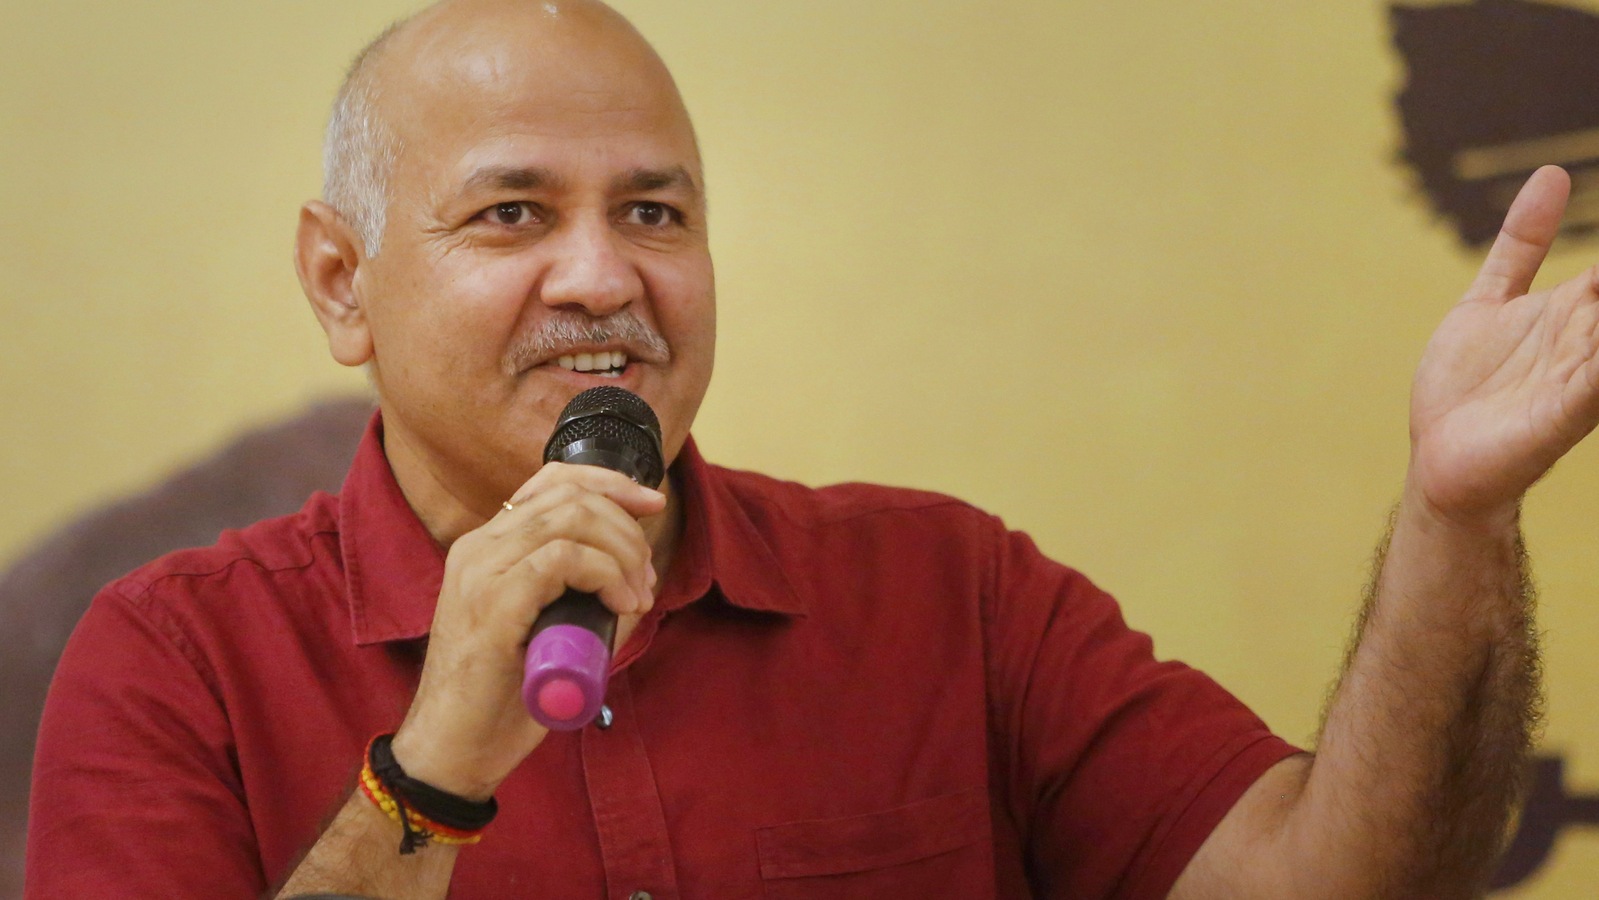 manish-sisodia-bank-locker-search-by-cbi-amid-row-over-excise-policy